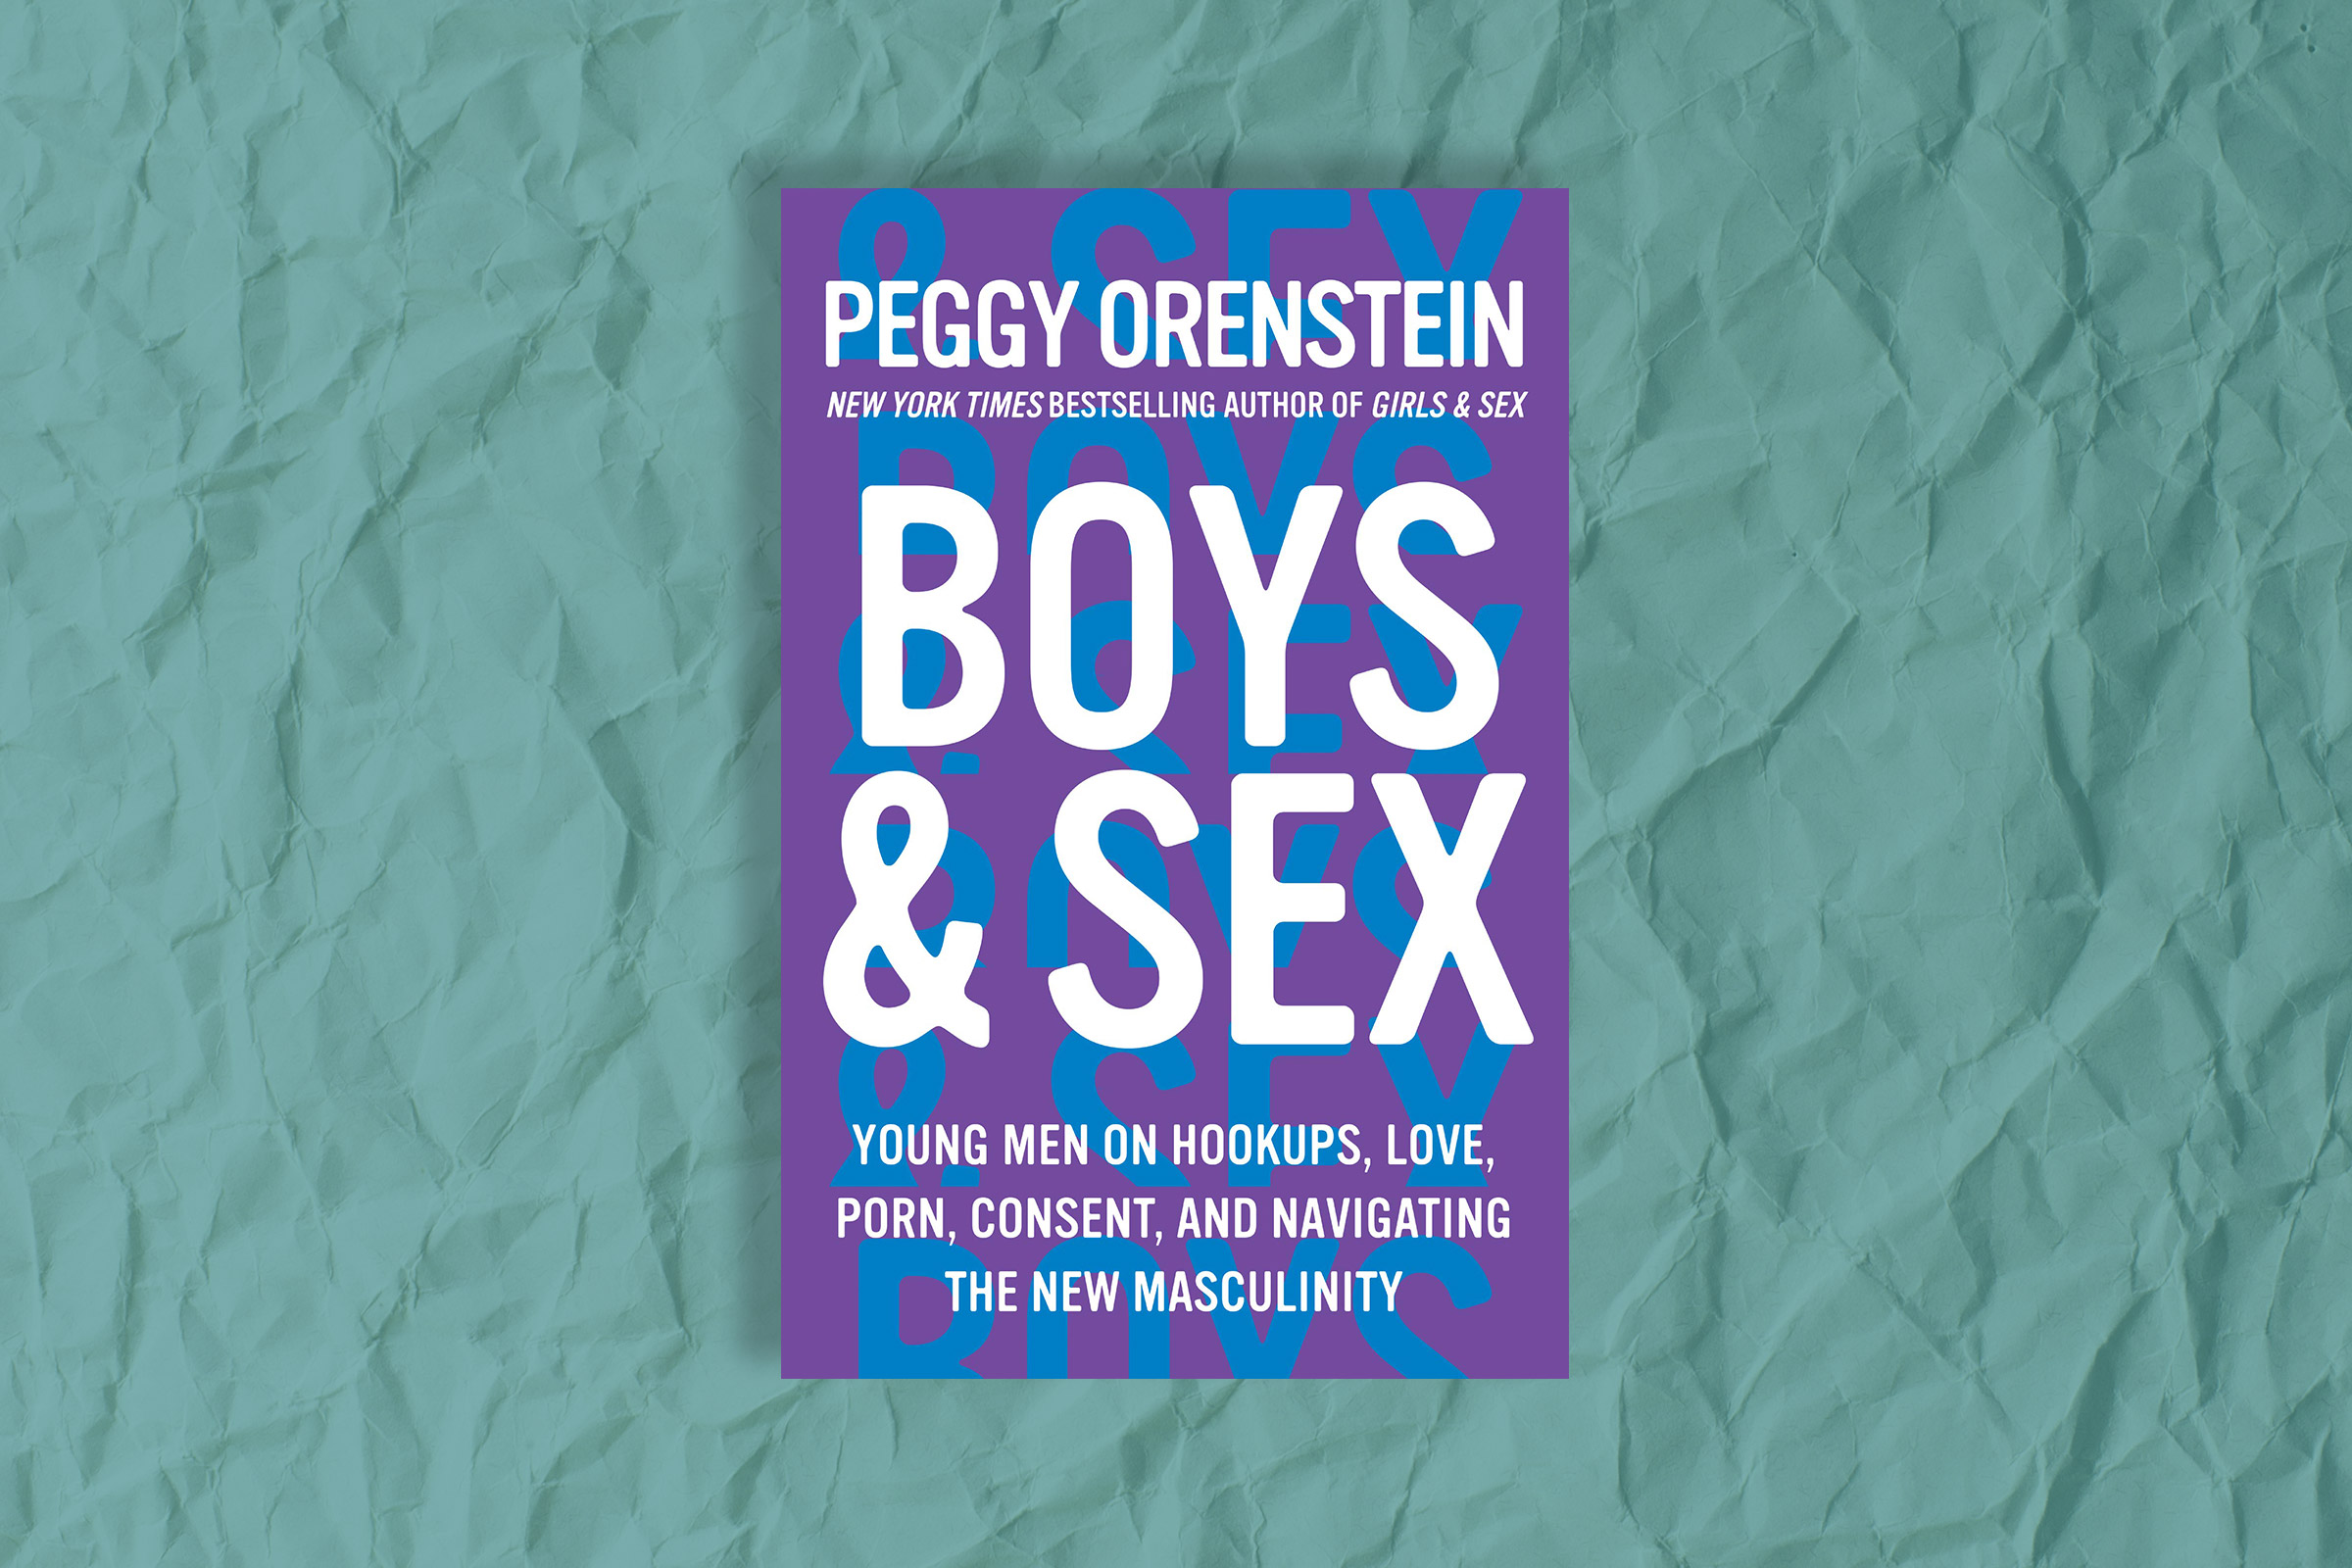 Small Age Sex - Peggy Orenstein on Her New Book 'Boys & Sex' | Time